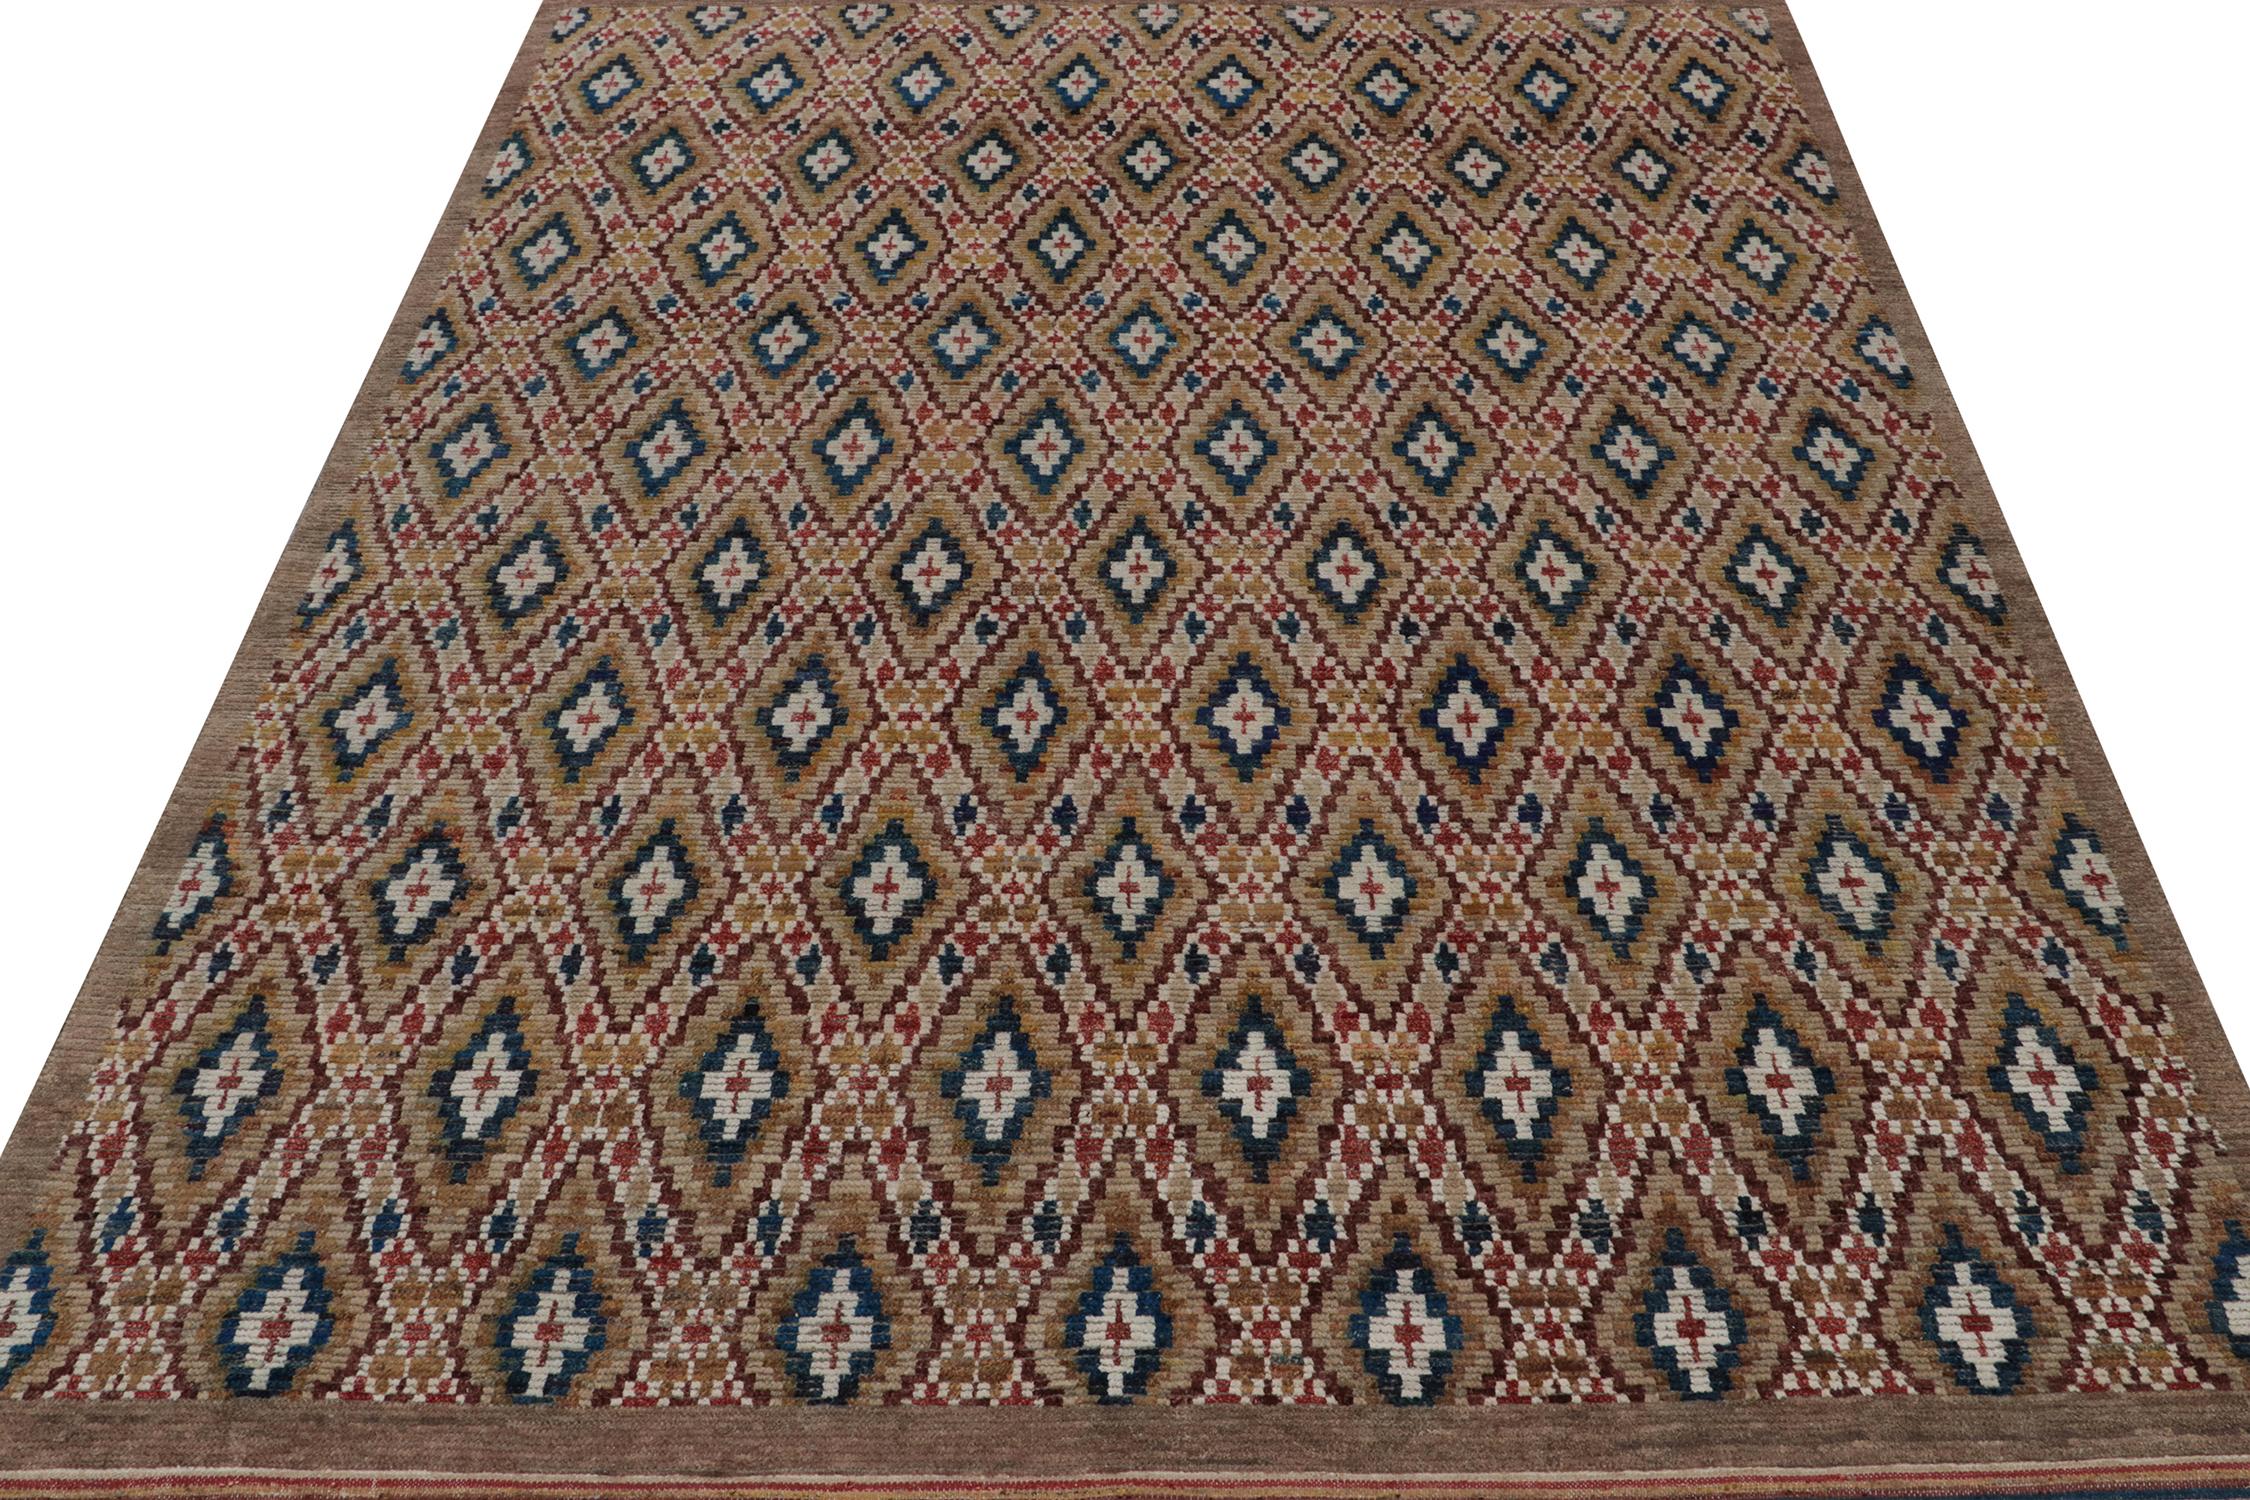 Indian Rug & Kilim’s Moroccan style rug in Brown, Red and Blue Diamond Patterns For Sale